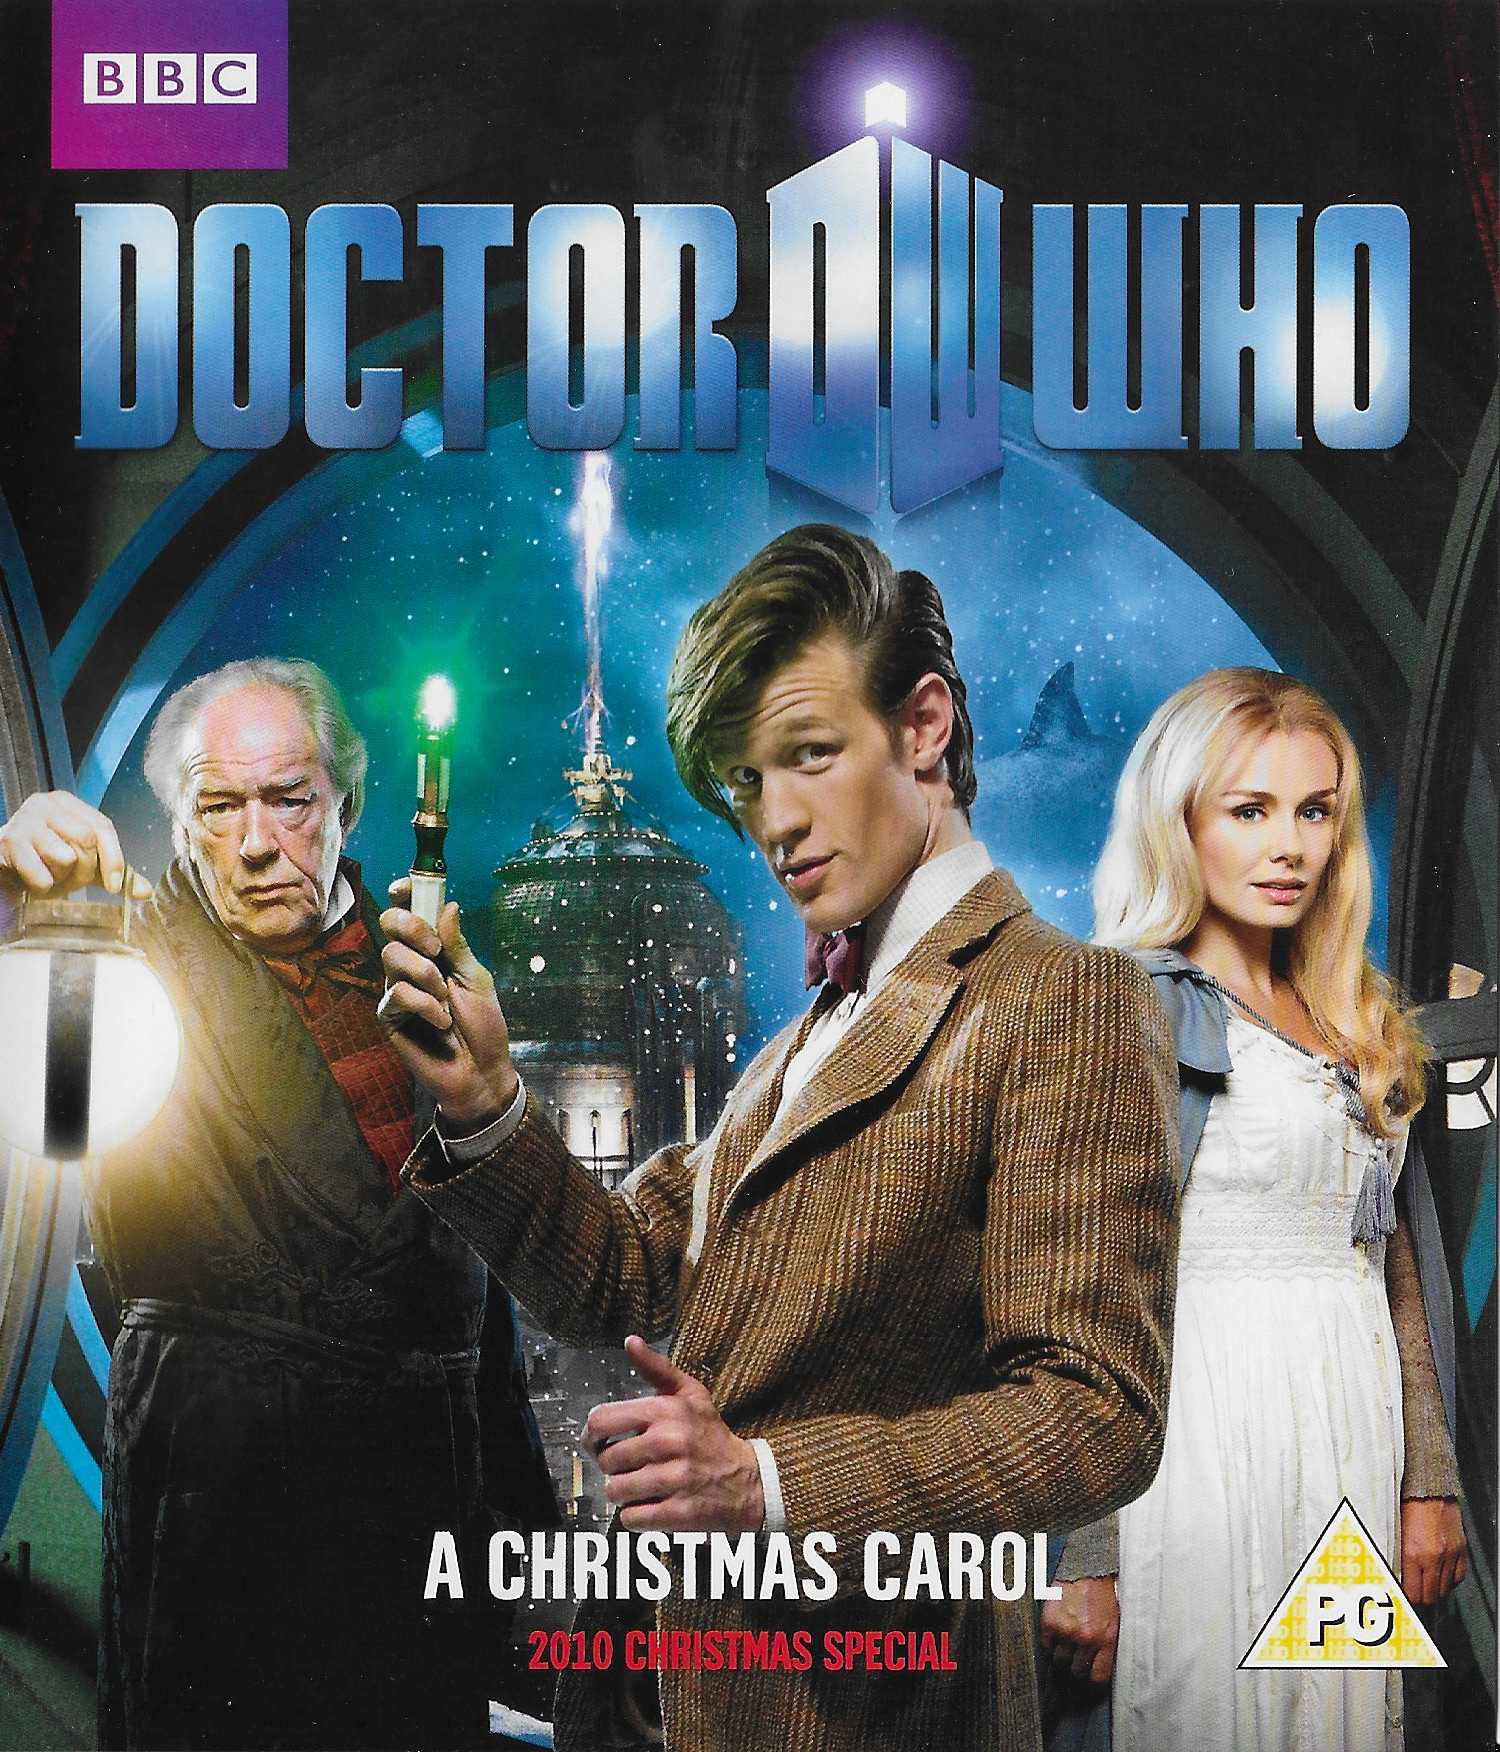 Picture of BBCBD 0132 Doctor Who - A Christmas carol blu-ray by artist Steven Moffat from the BBC records and Tapes library